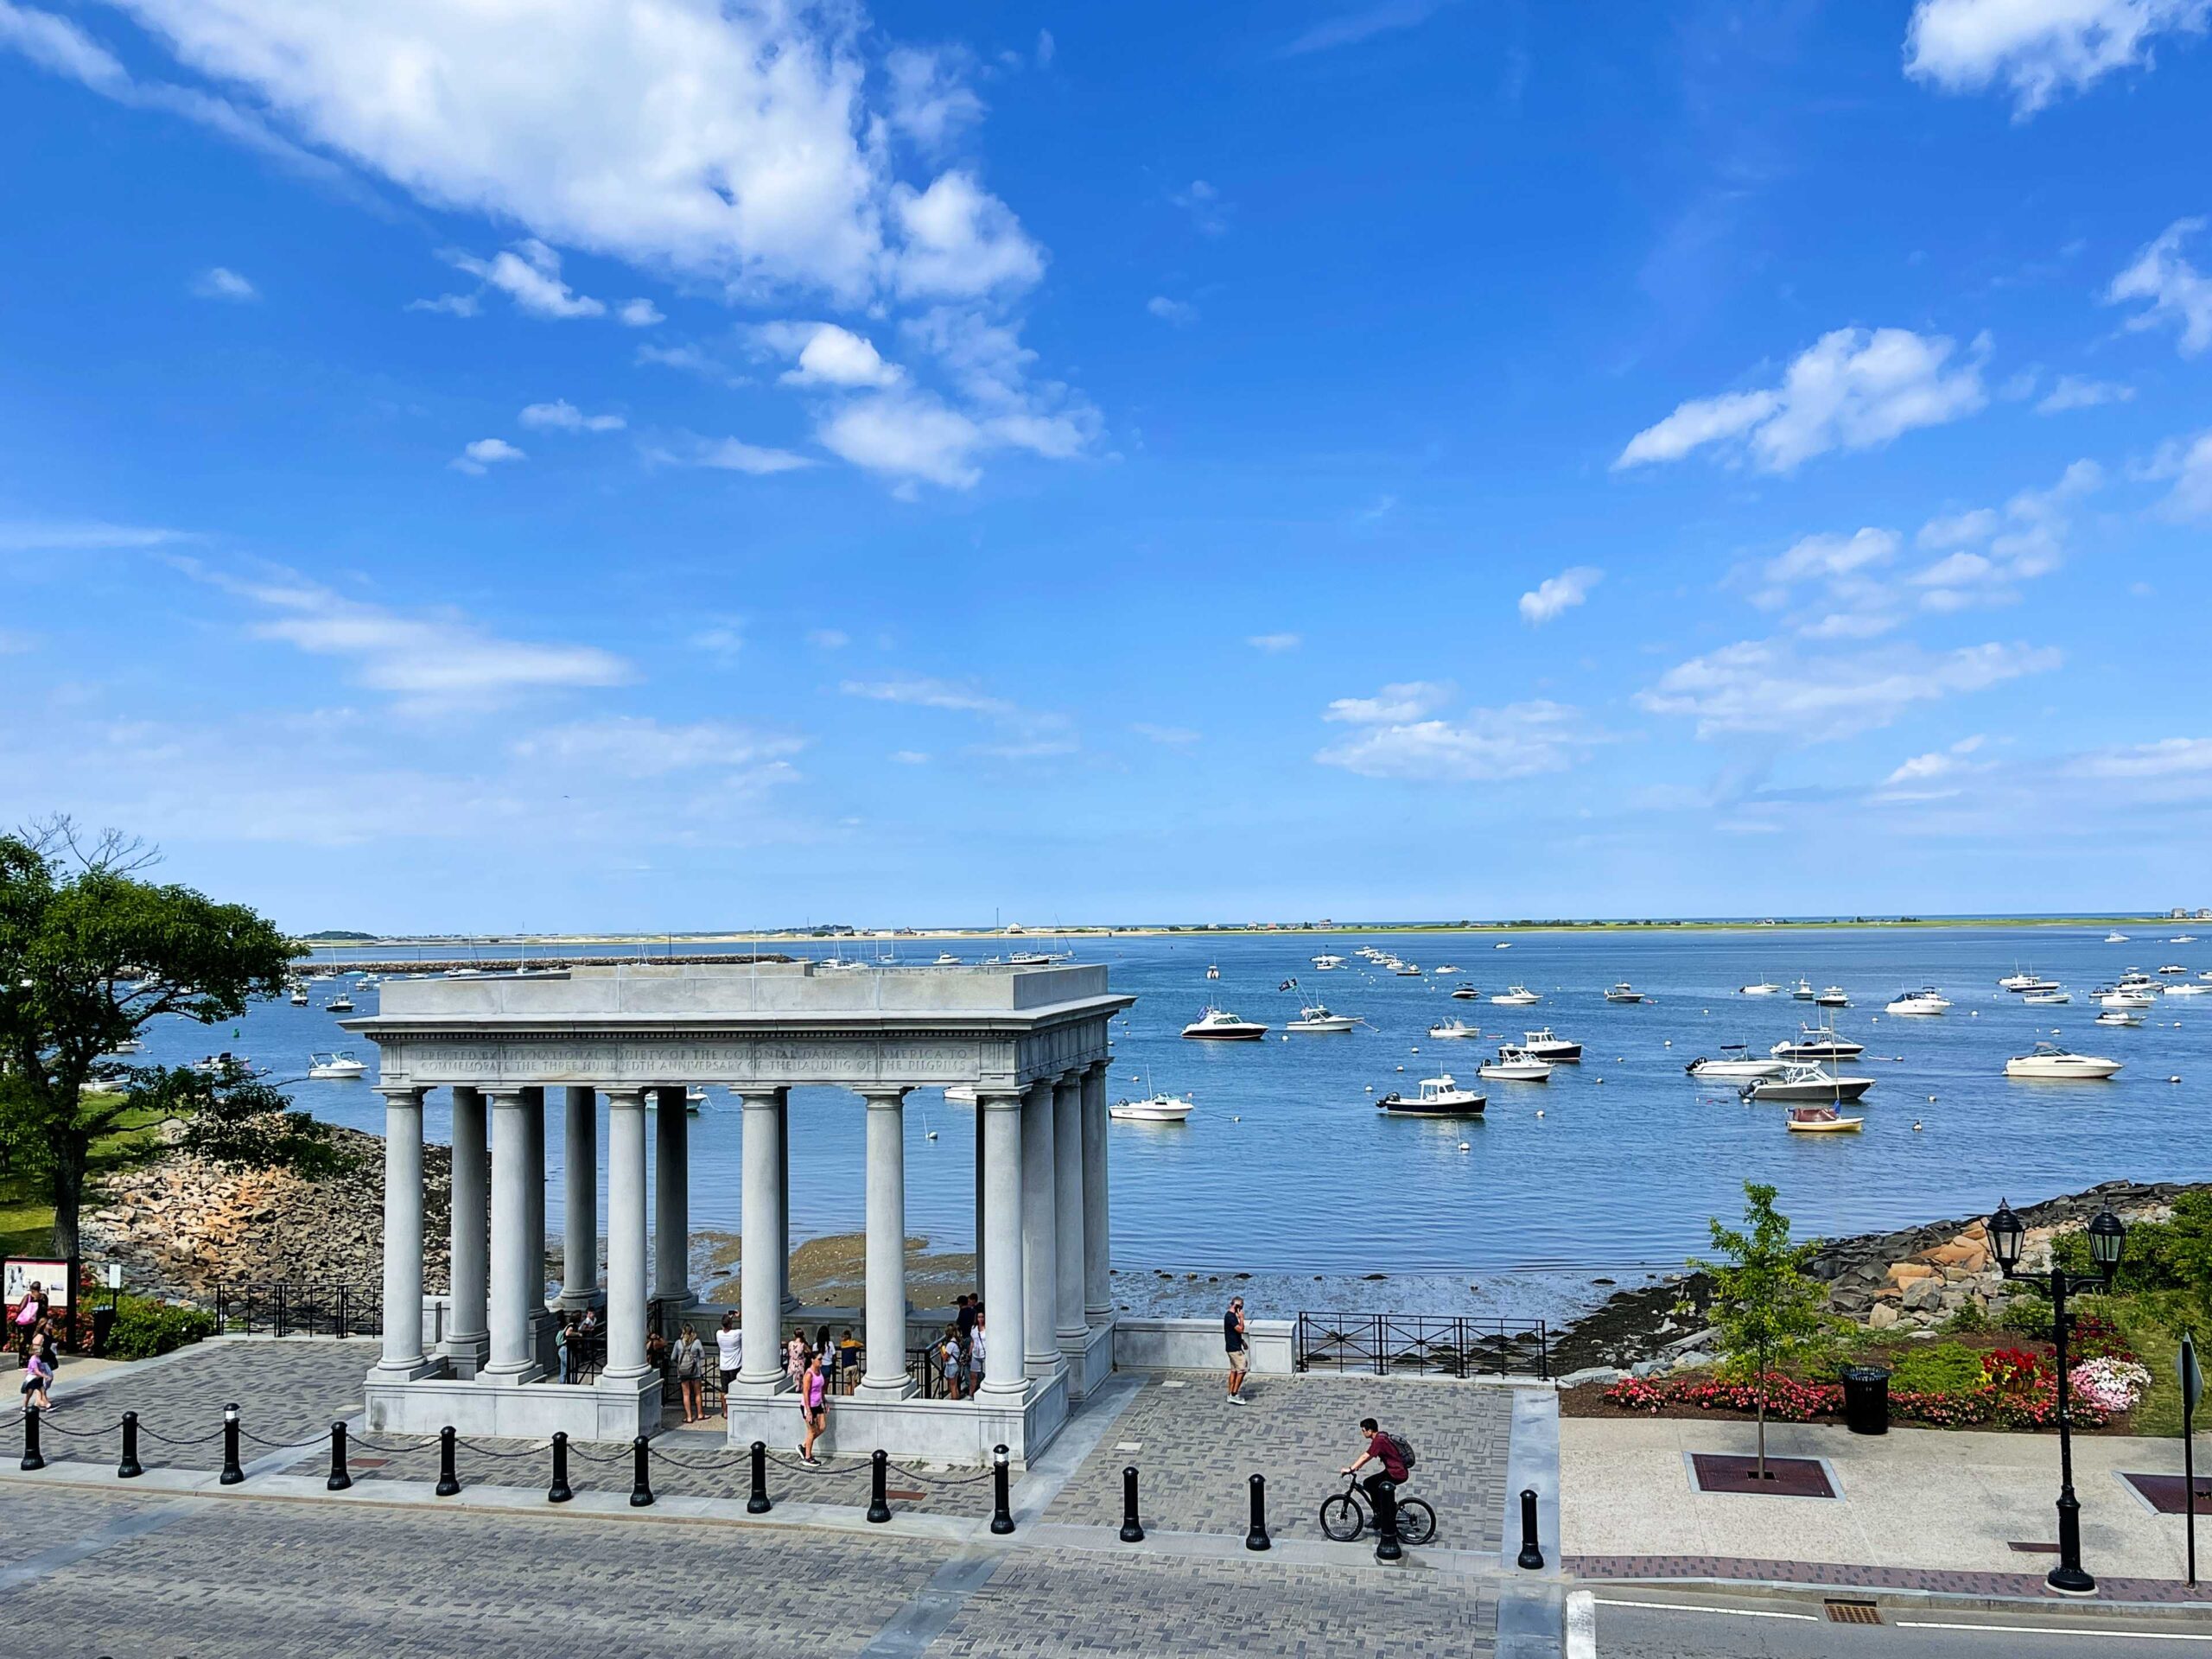 can you visit plymouth rock